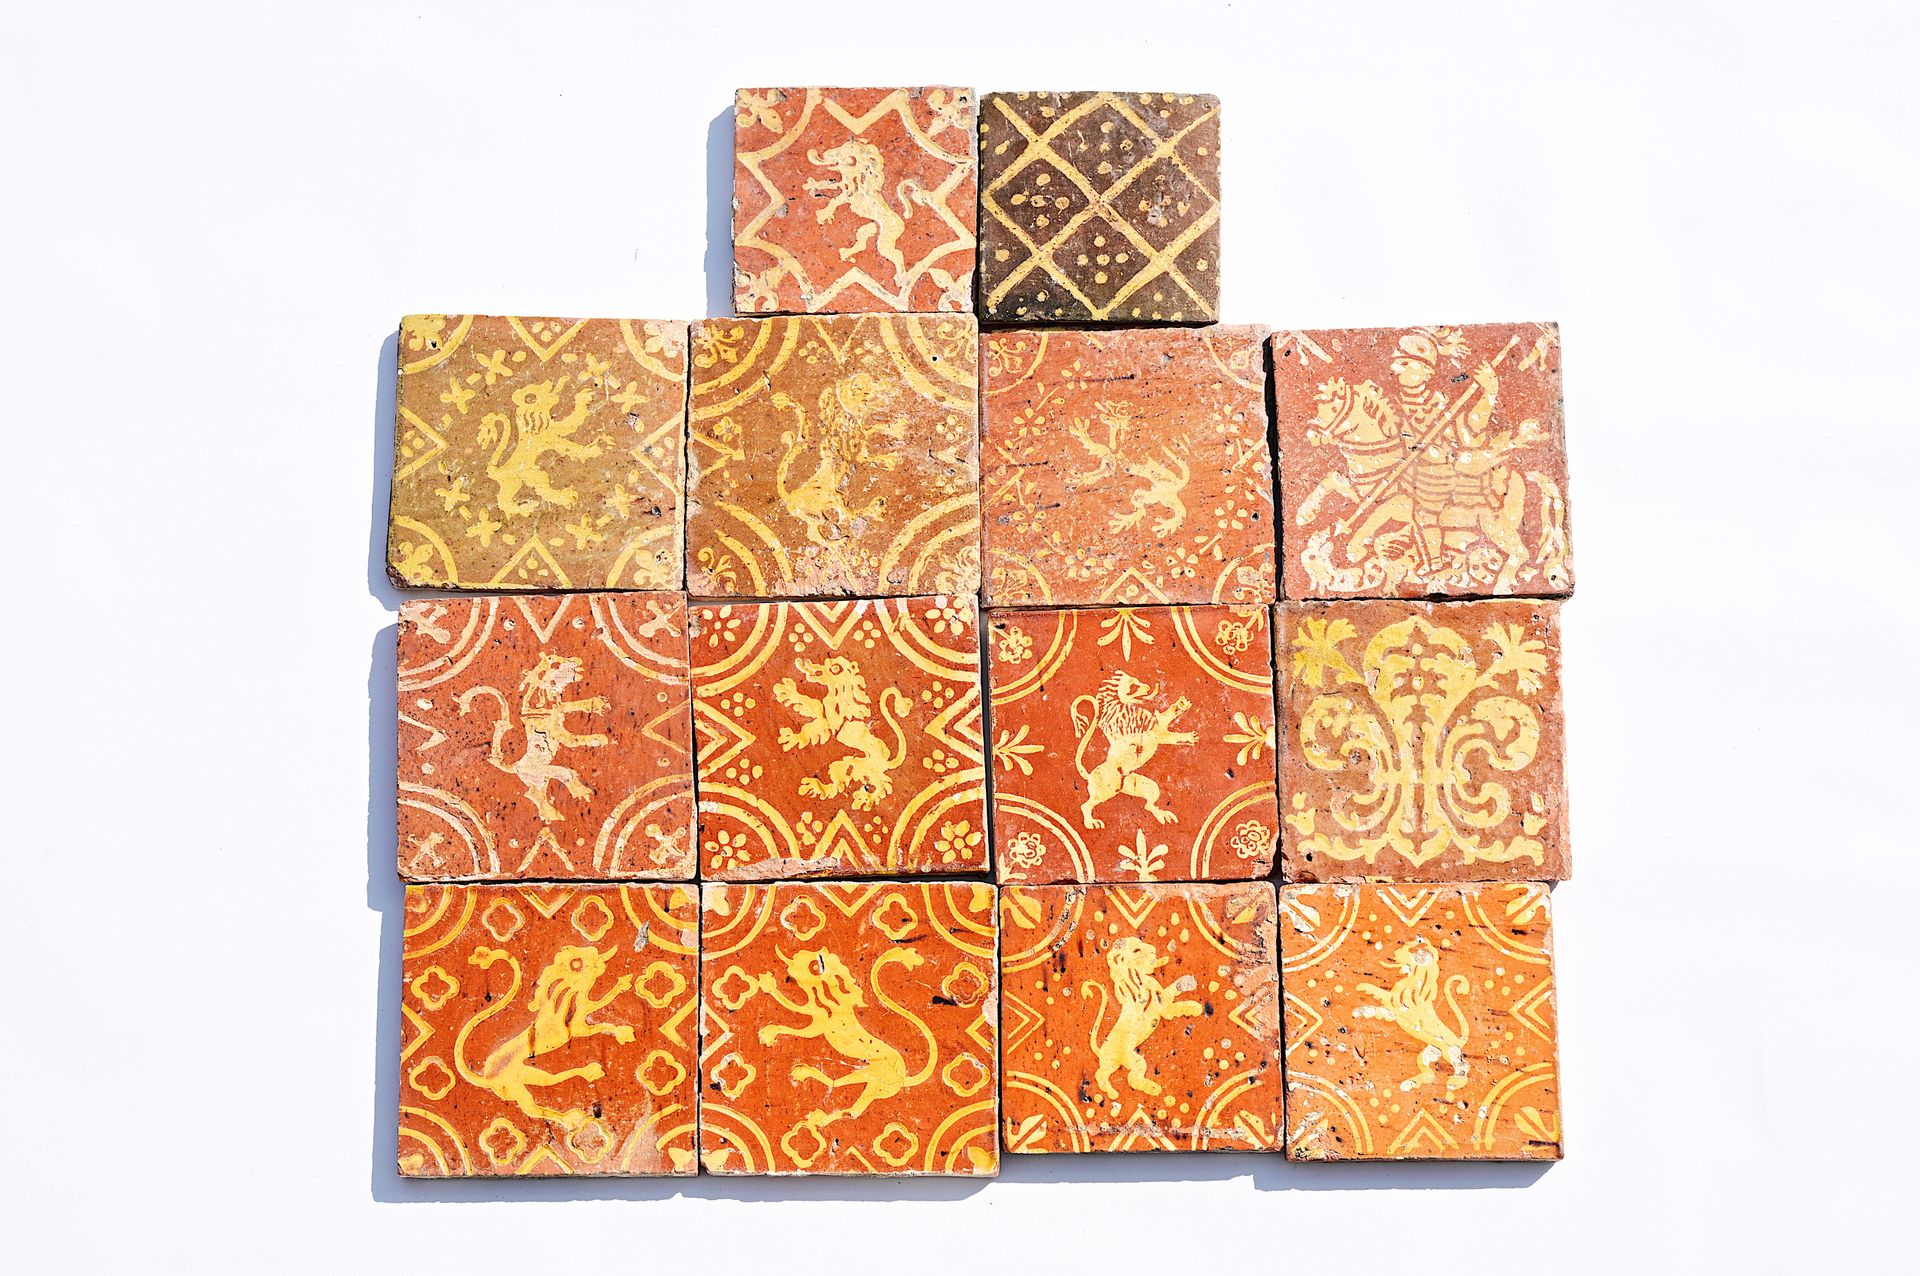 Fourteen Flemish decorated redware tiles in medieval style, 18th/19th C. Catorce&hellip;